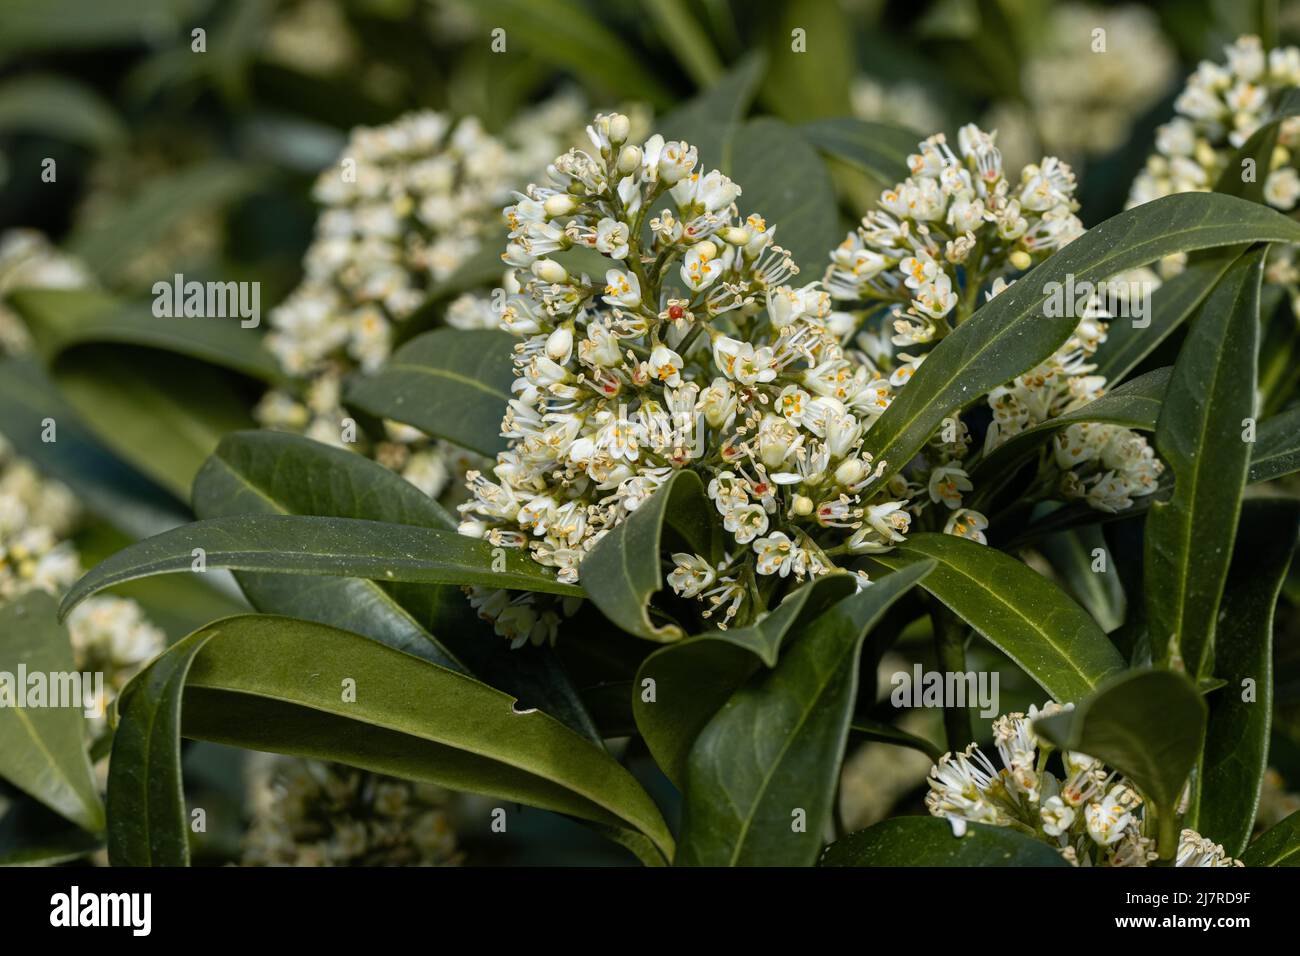 Close up of Skimmia x confusa Kew Green flowers Stock Photo